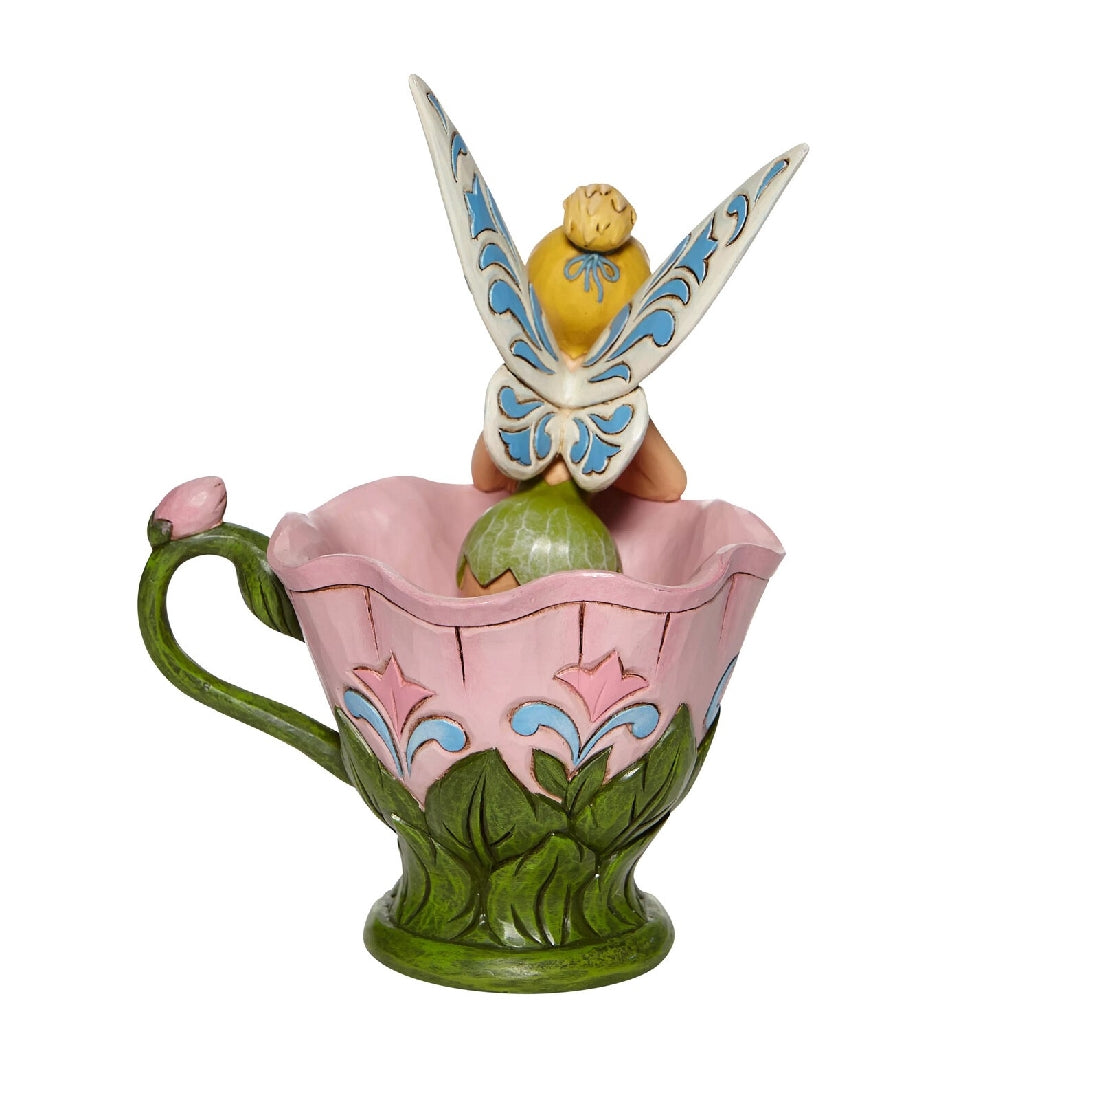 DISNEY TRADITIONS BY JIM SHORE TINKER BELL SITTING IN FLOWER CUP 15CM